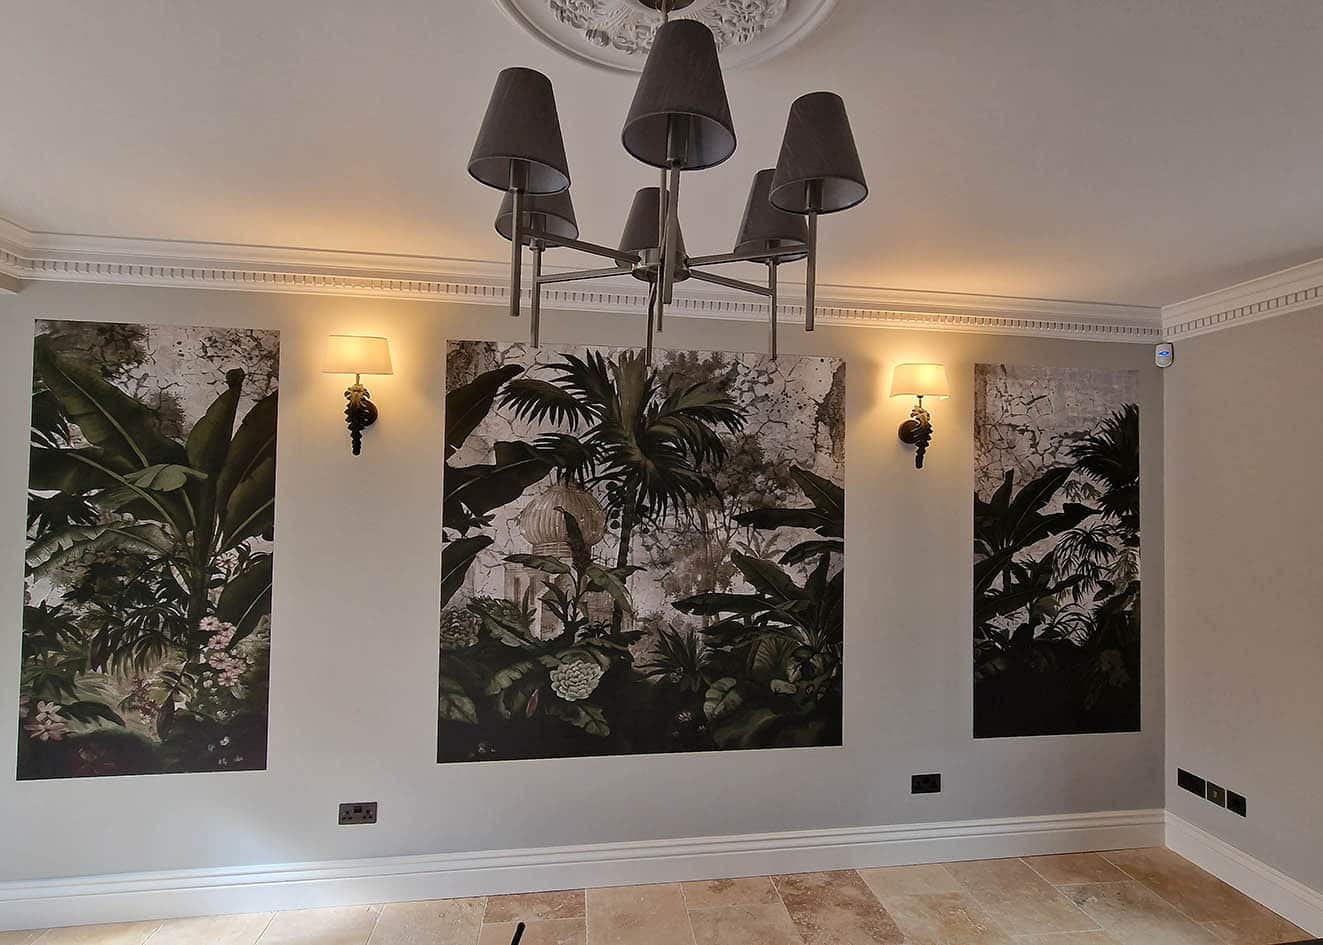 Ananbo wallpaper installation by Bluespec Decorating Limited installed in 3 panels to be framed. The wallpaper is in black and white palm trees and banana trees.